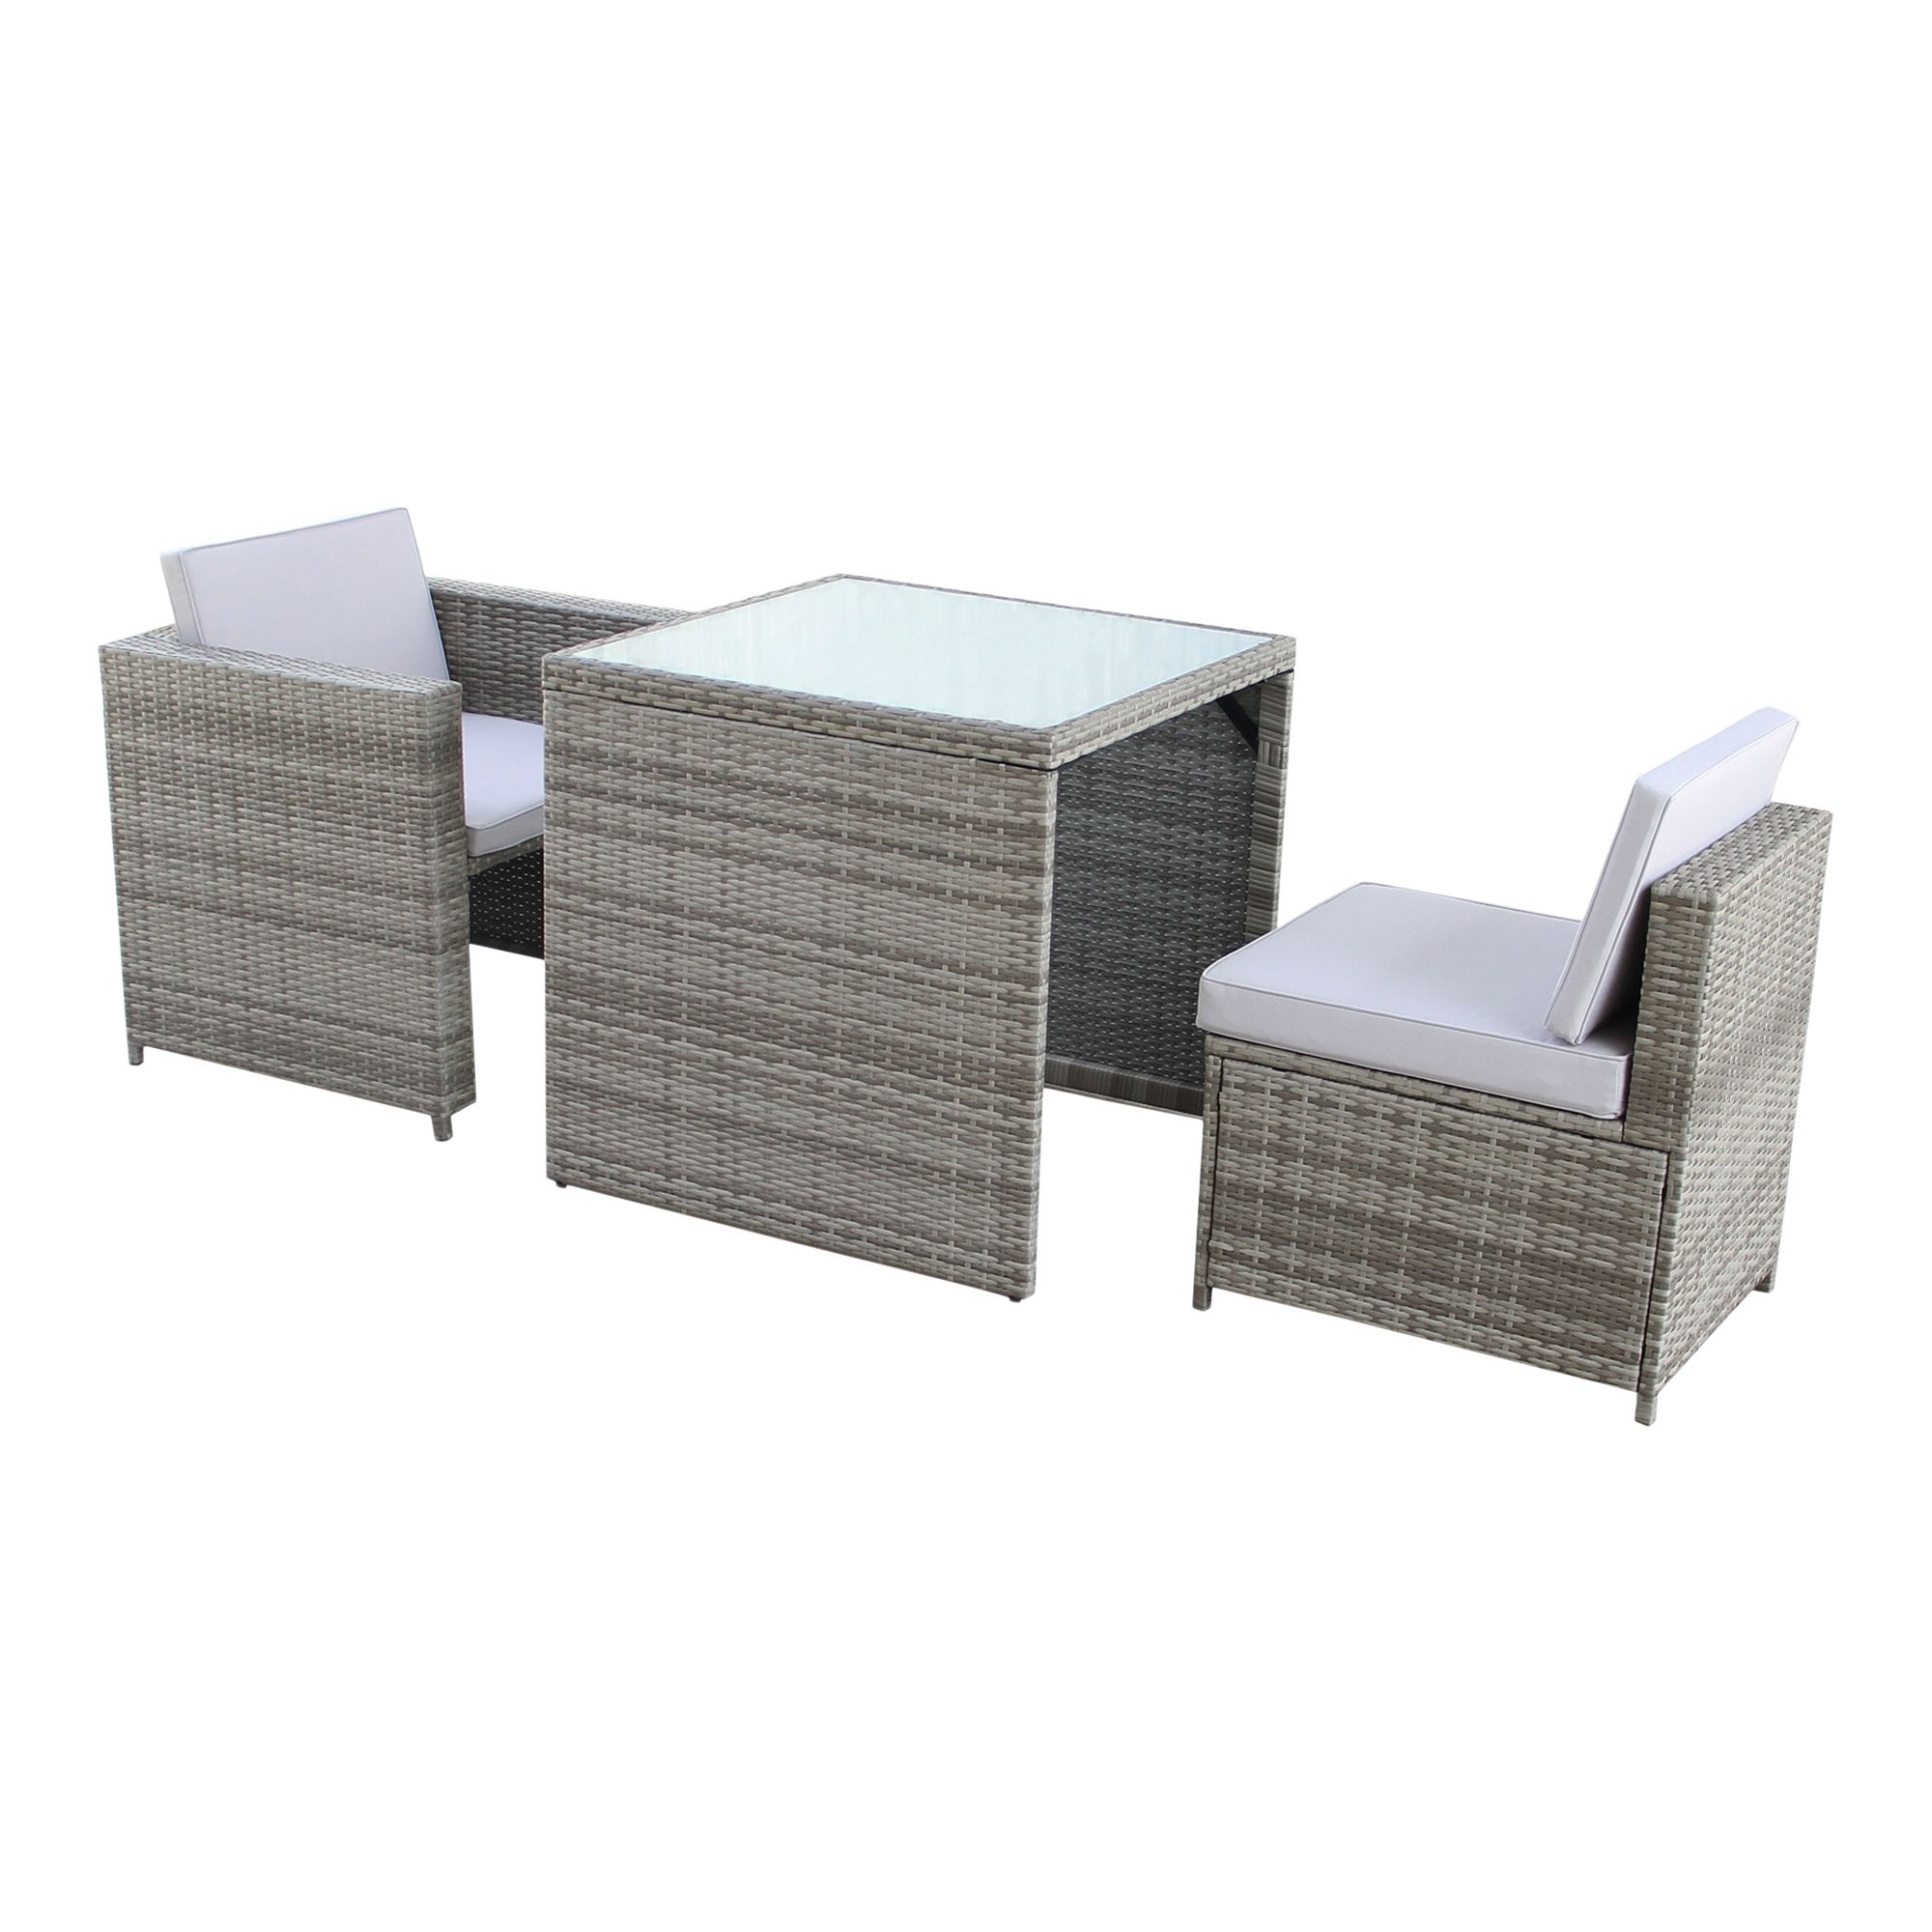 Cony Light brown 2 seater Dining set